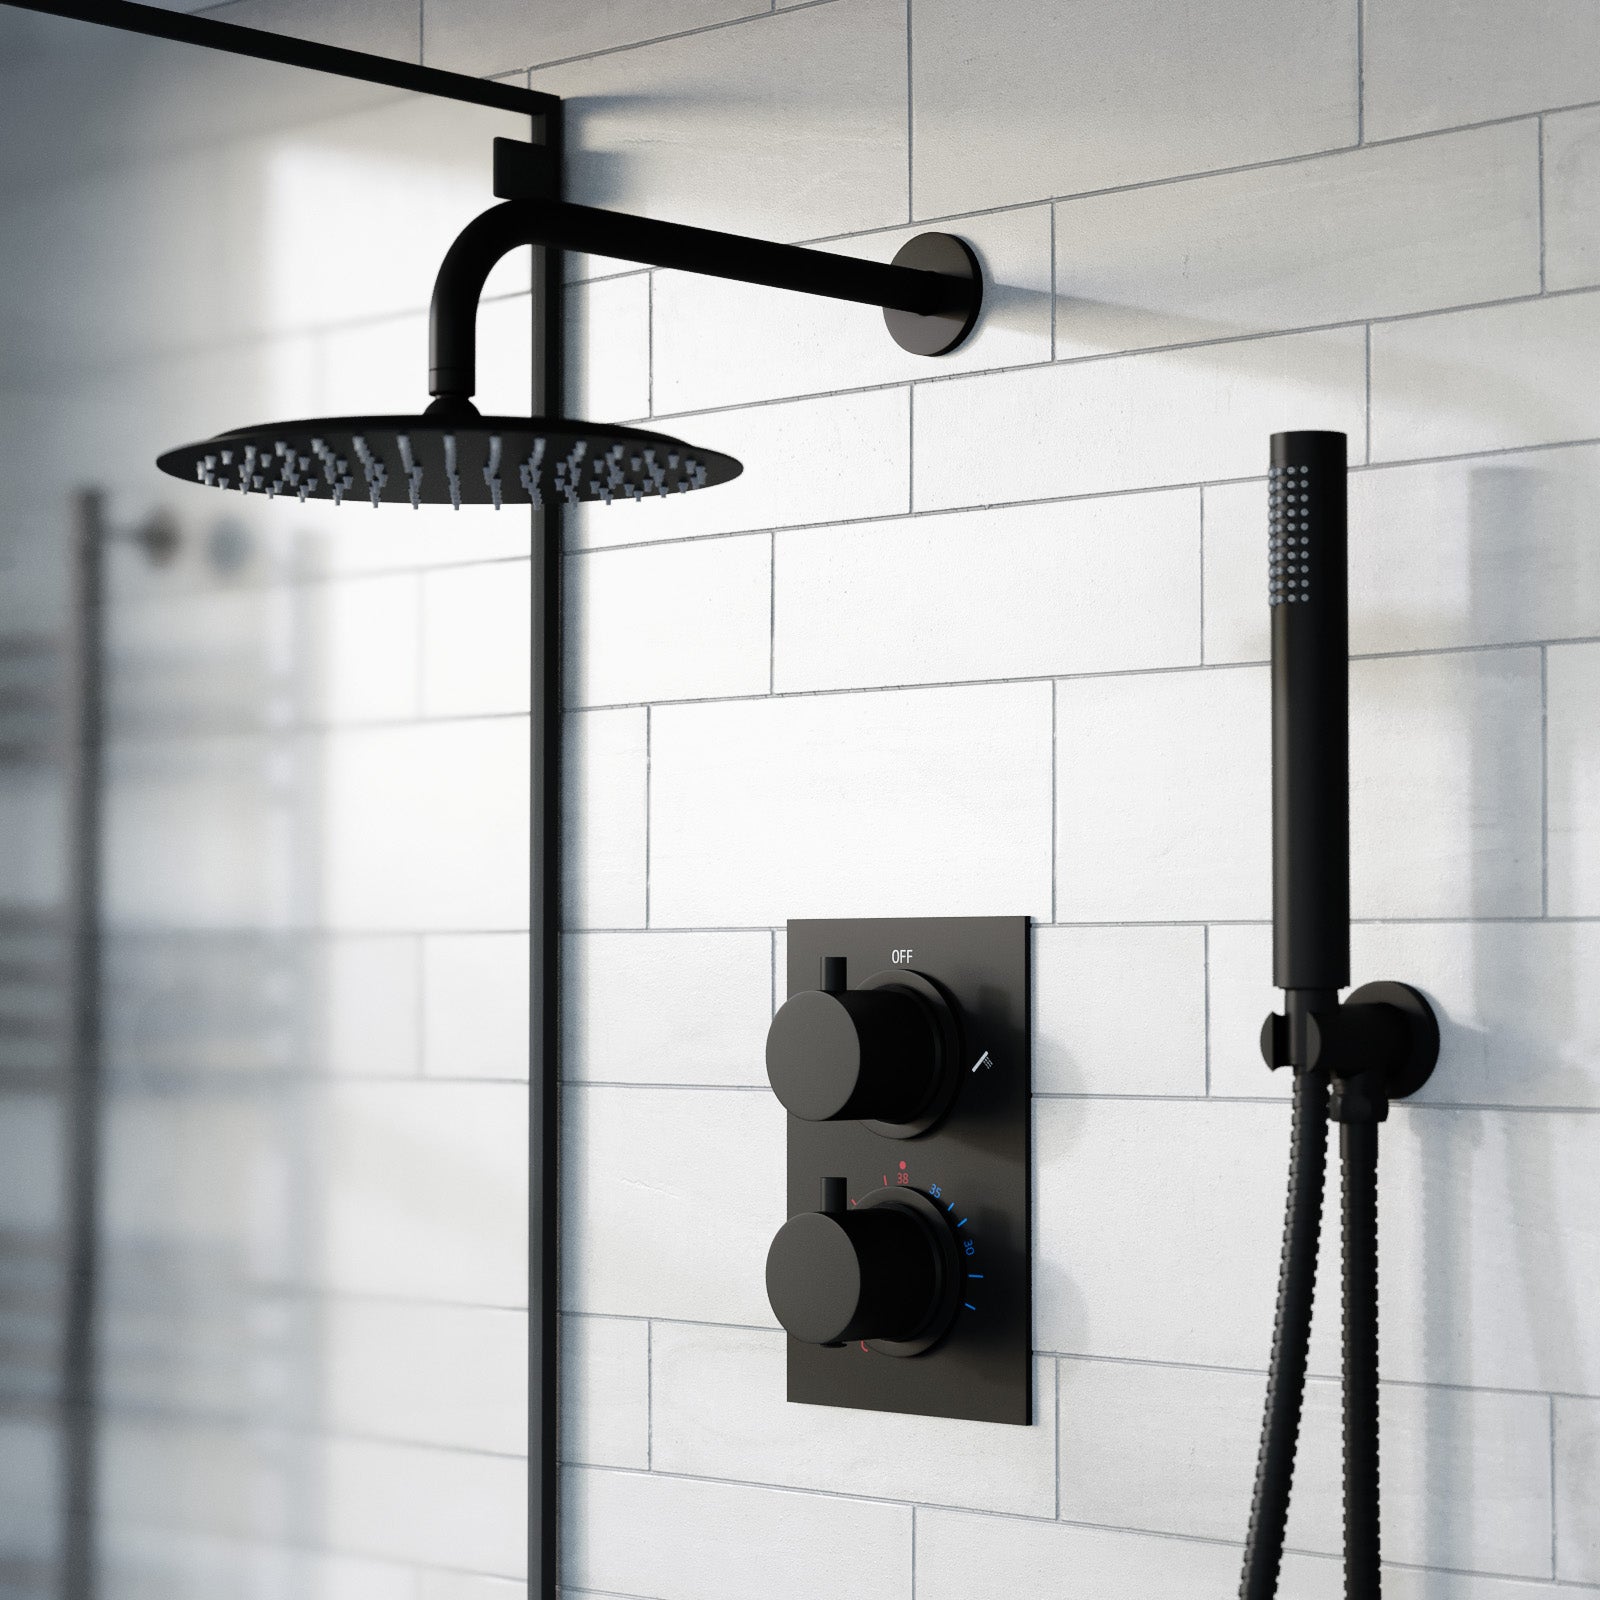 Folke 2 Dial 2 Way Round Concealed Thermostatic Shower Mixer Valve, Shower Head, and Handset Black Matte